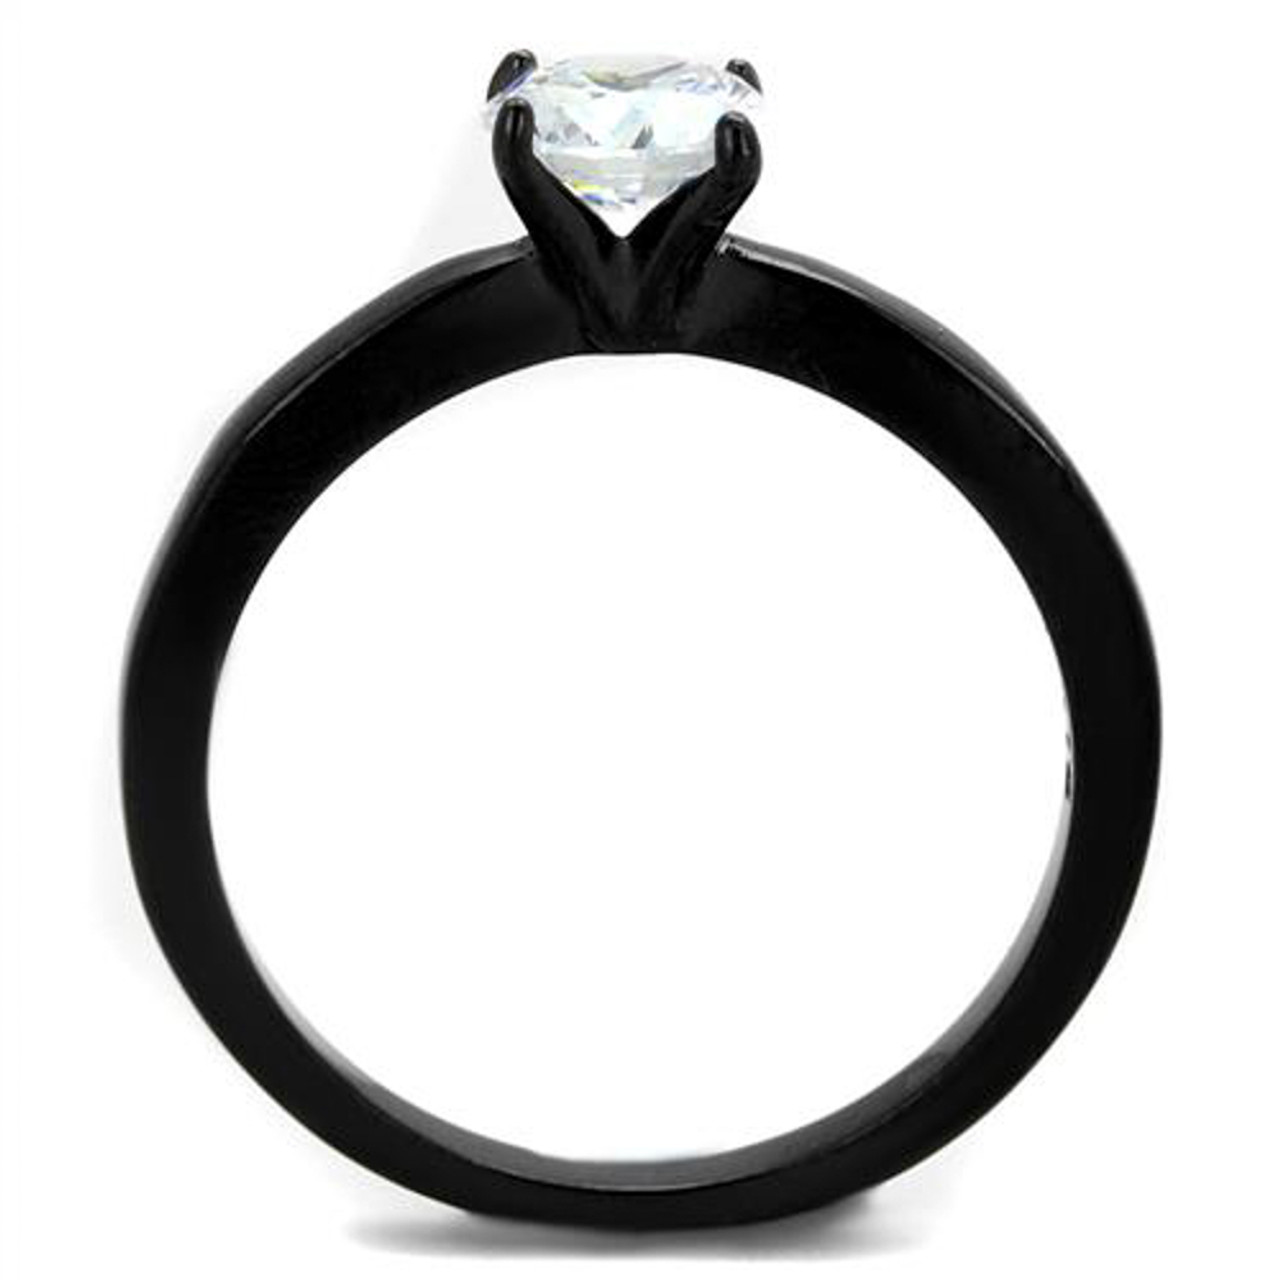 ARTK2282 Stainless Steel 1.65 Ct Round Cut AAA Cz Black Engagement Ring  Women's Size 5-10 